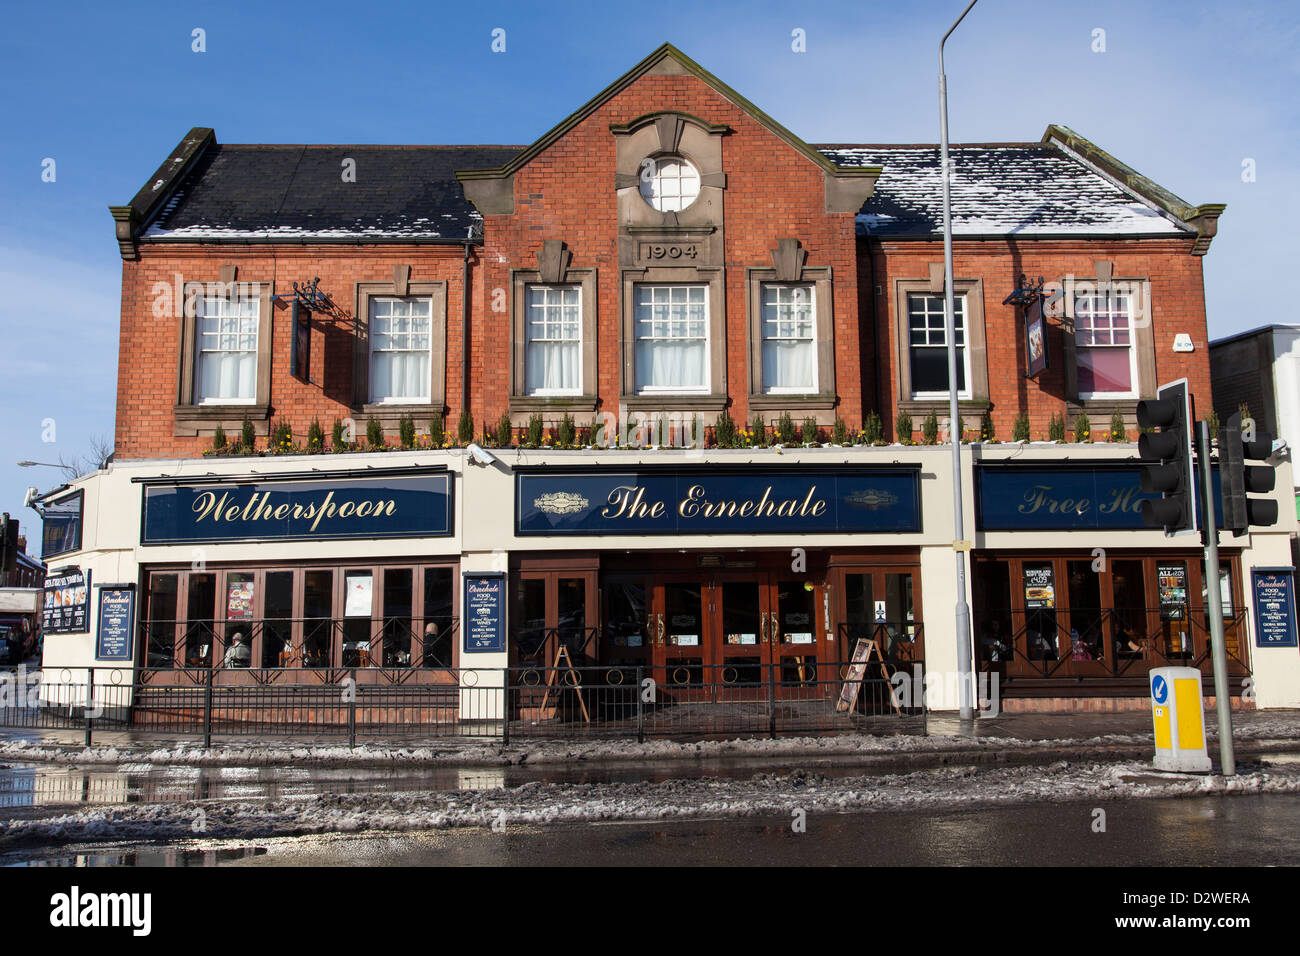 A Wetherspoon public house, The Ernehale in Arnold, Nottingham, England, U.K. Stock Photo